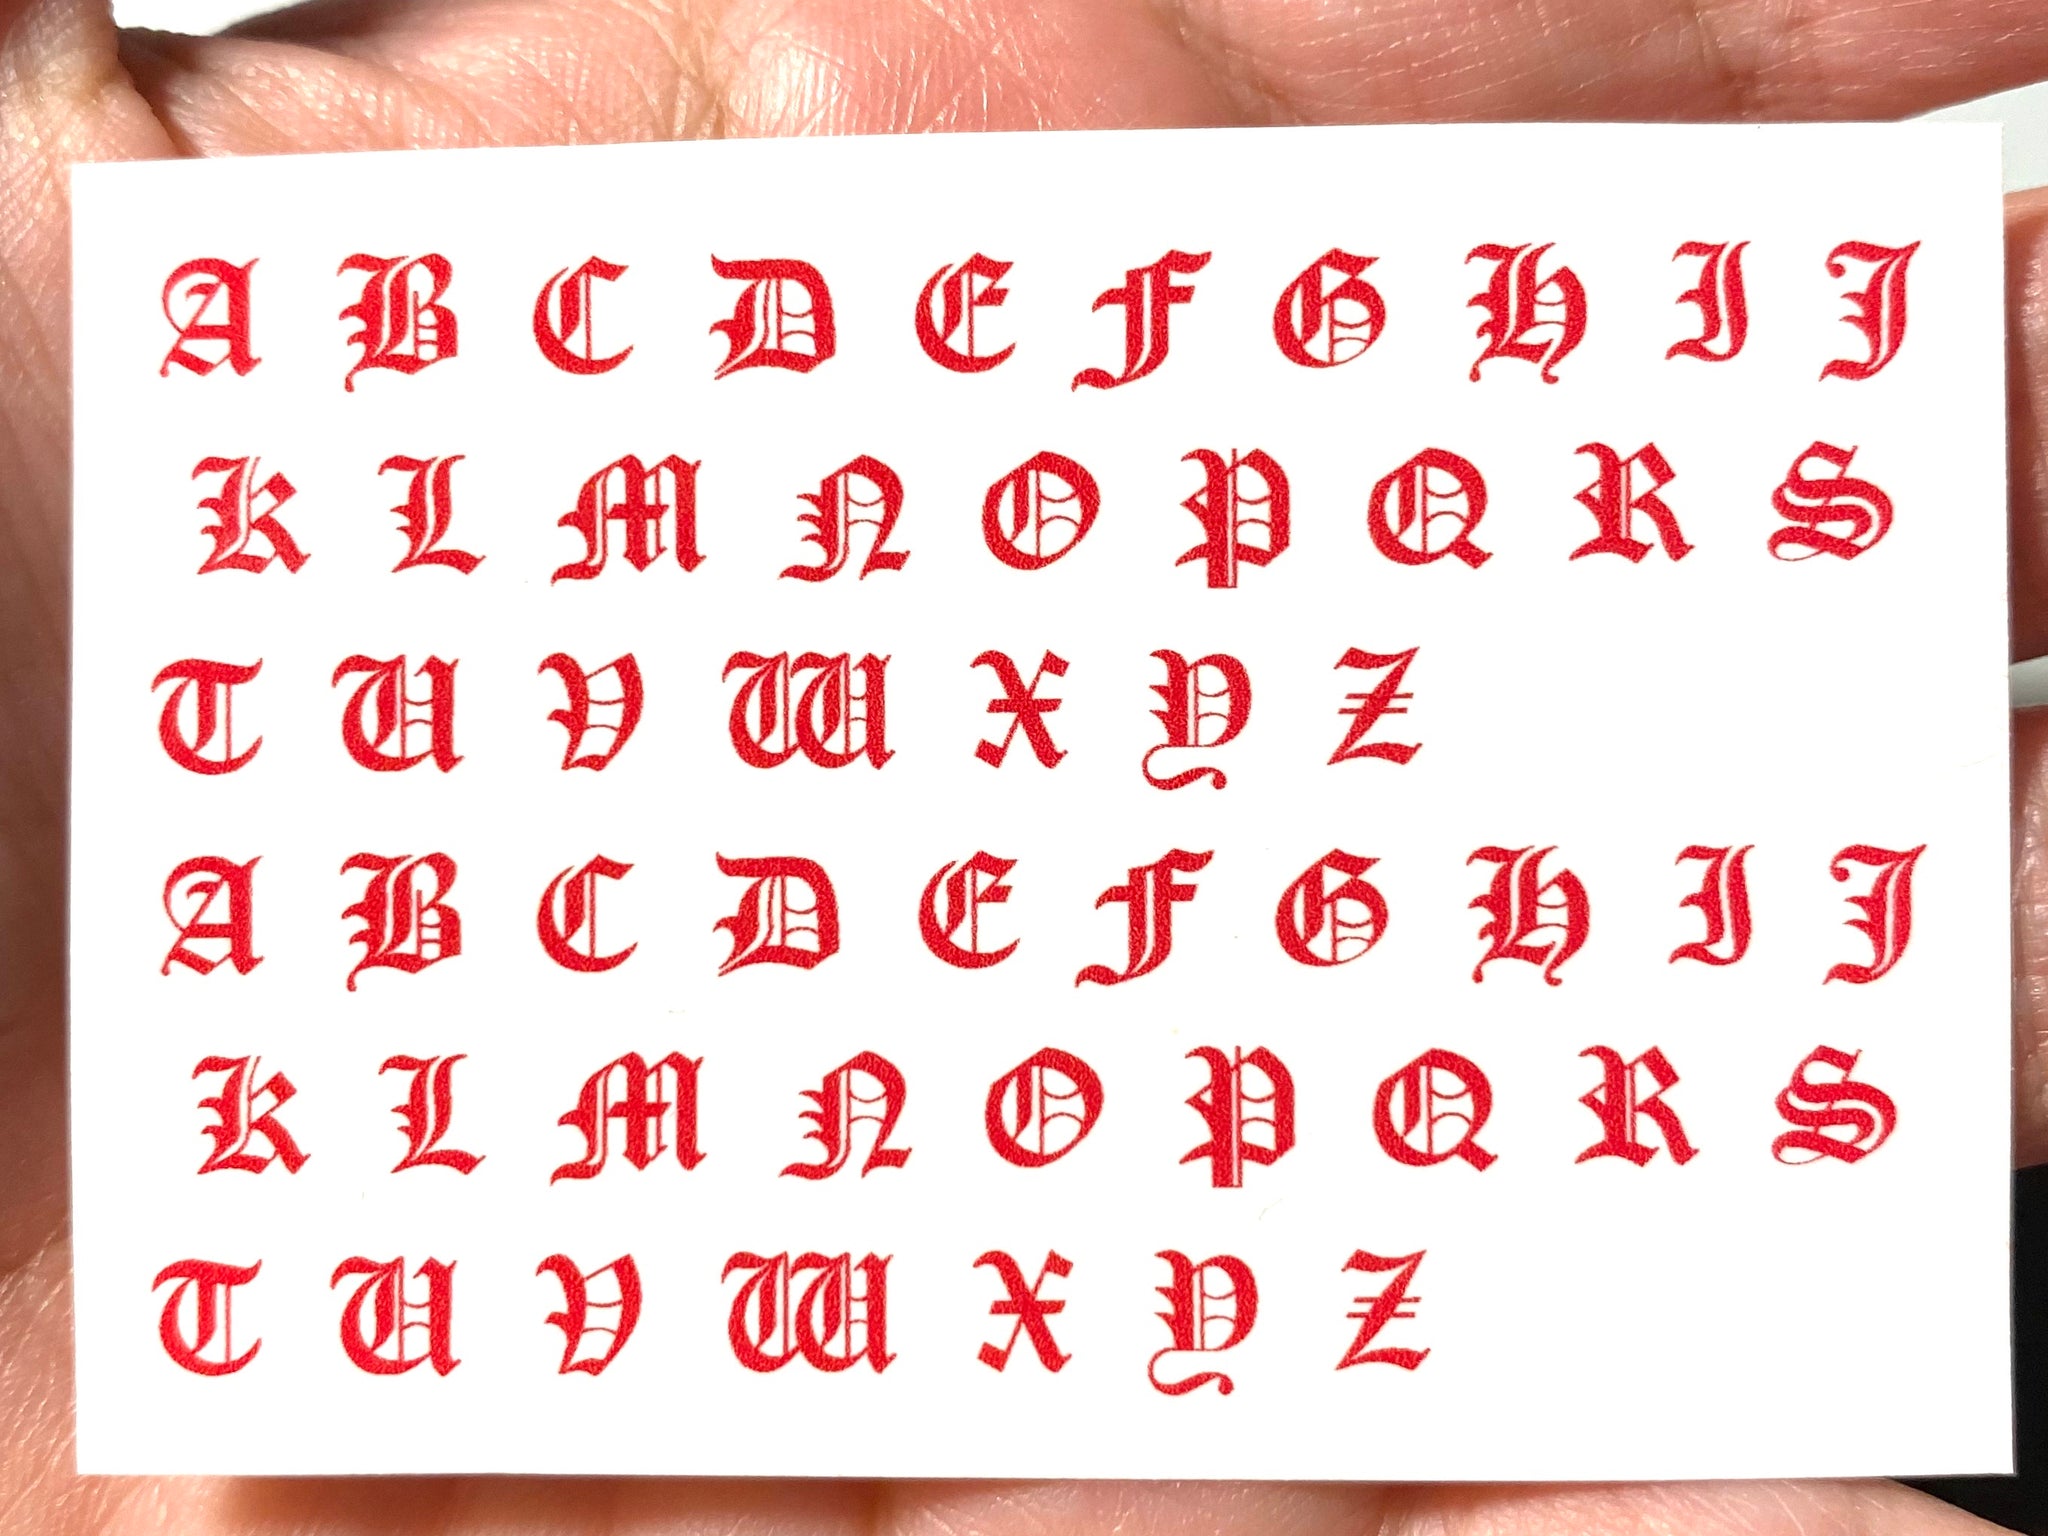 Red Old English Letters